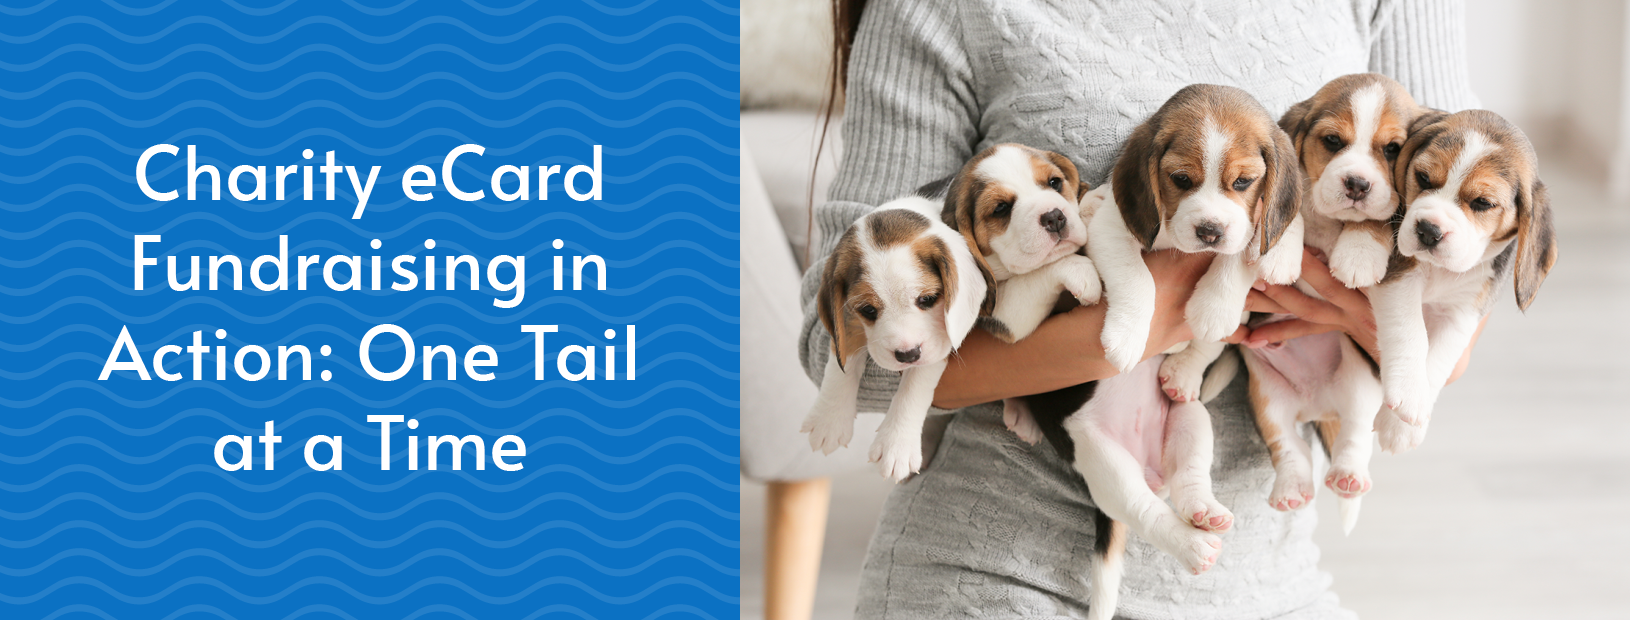 This post is a case study for how One Tail at a Time used charity eCards to fundraise.